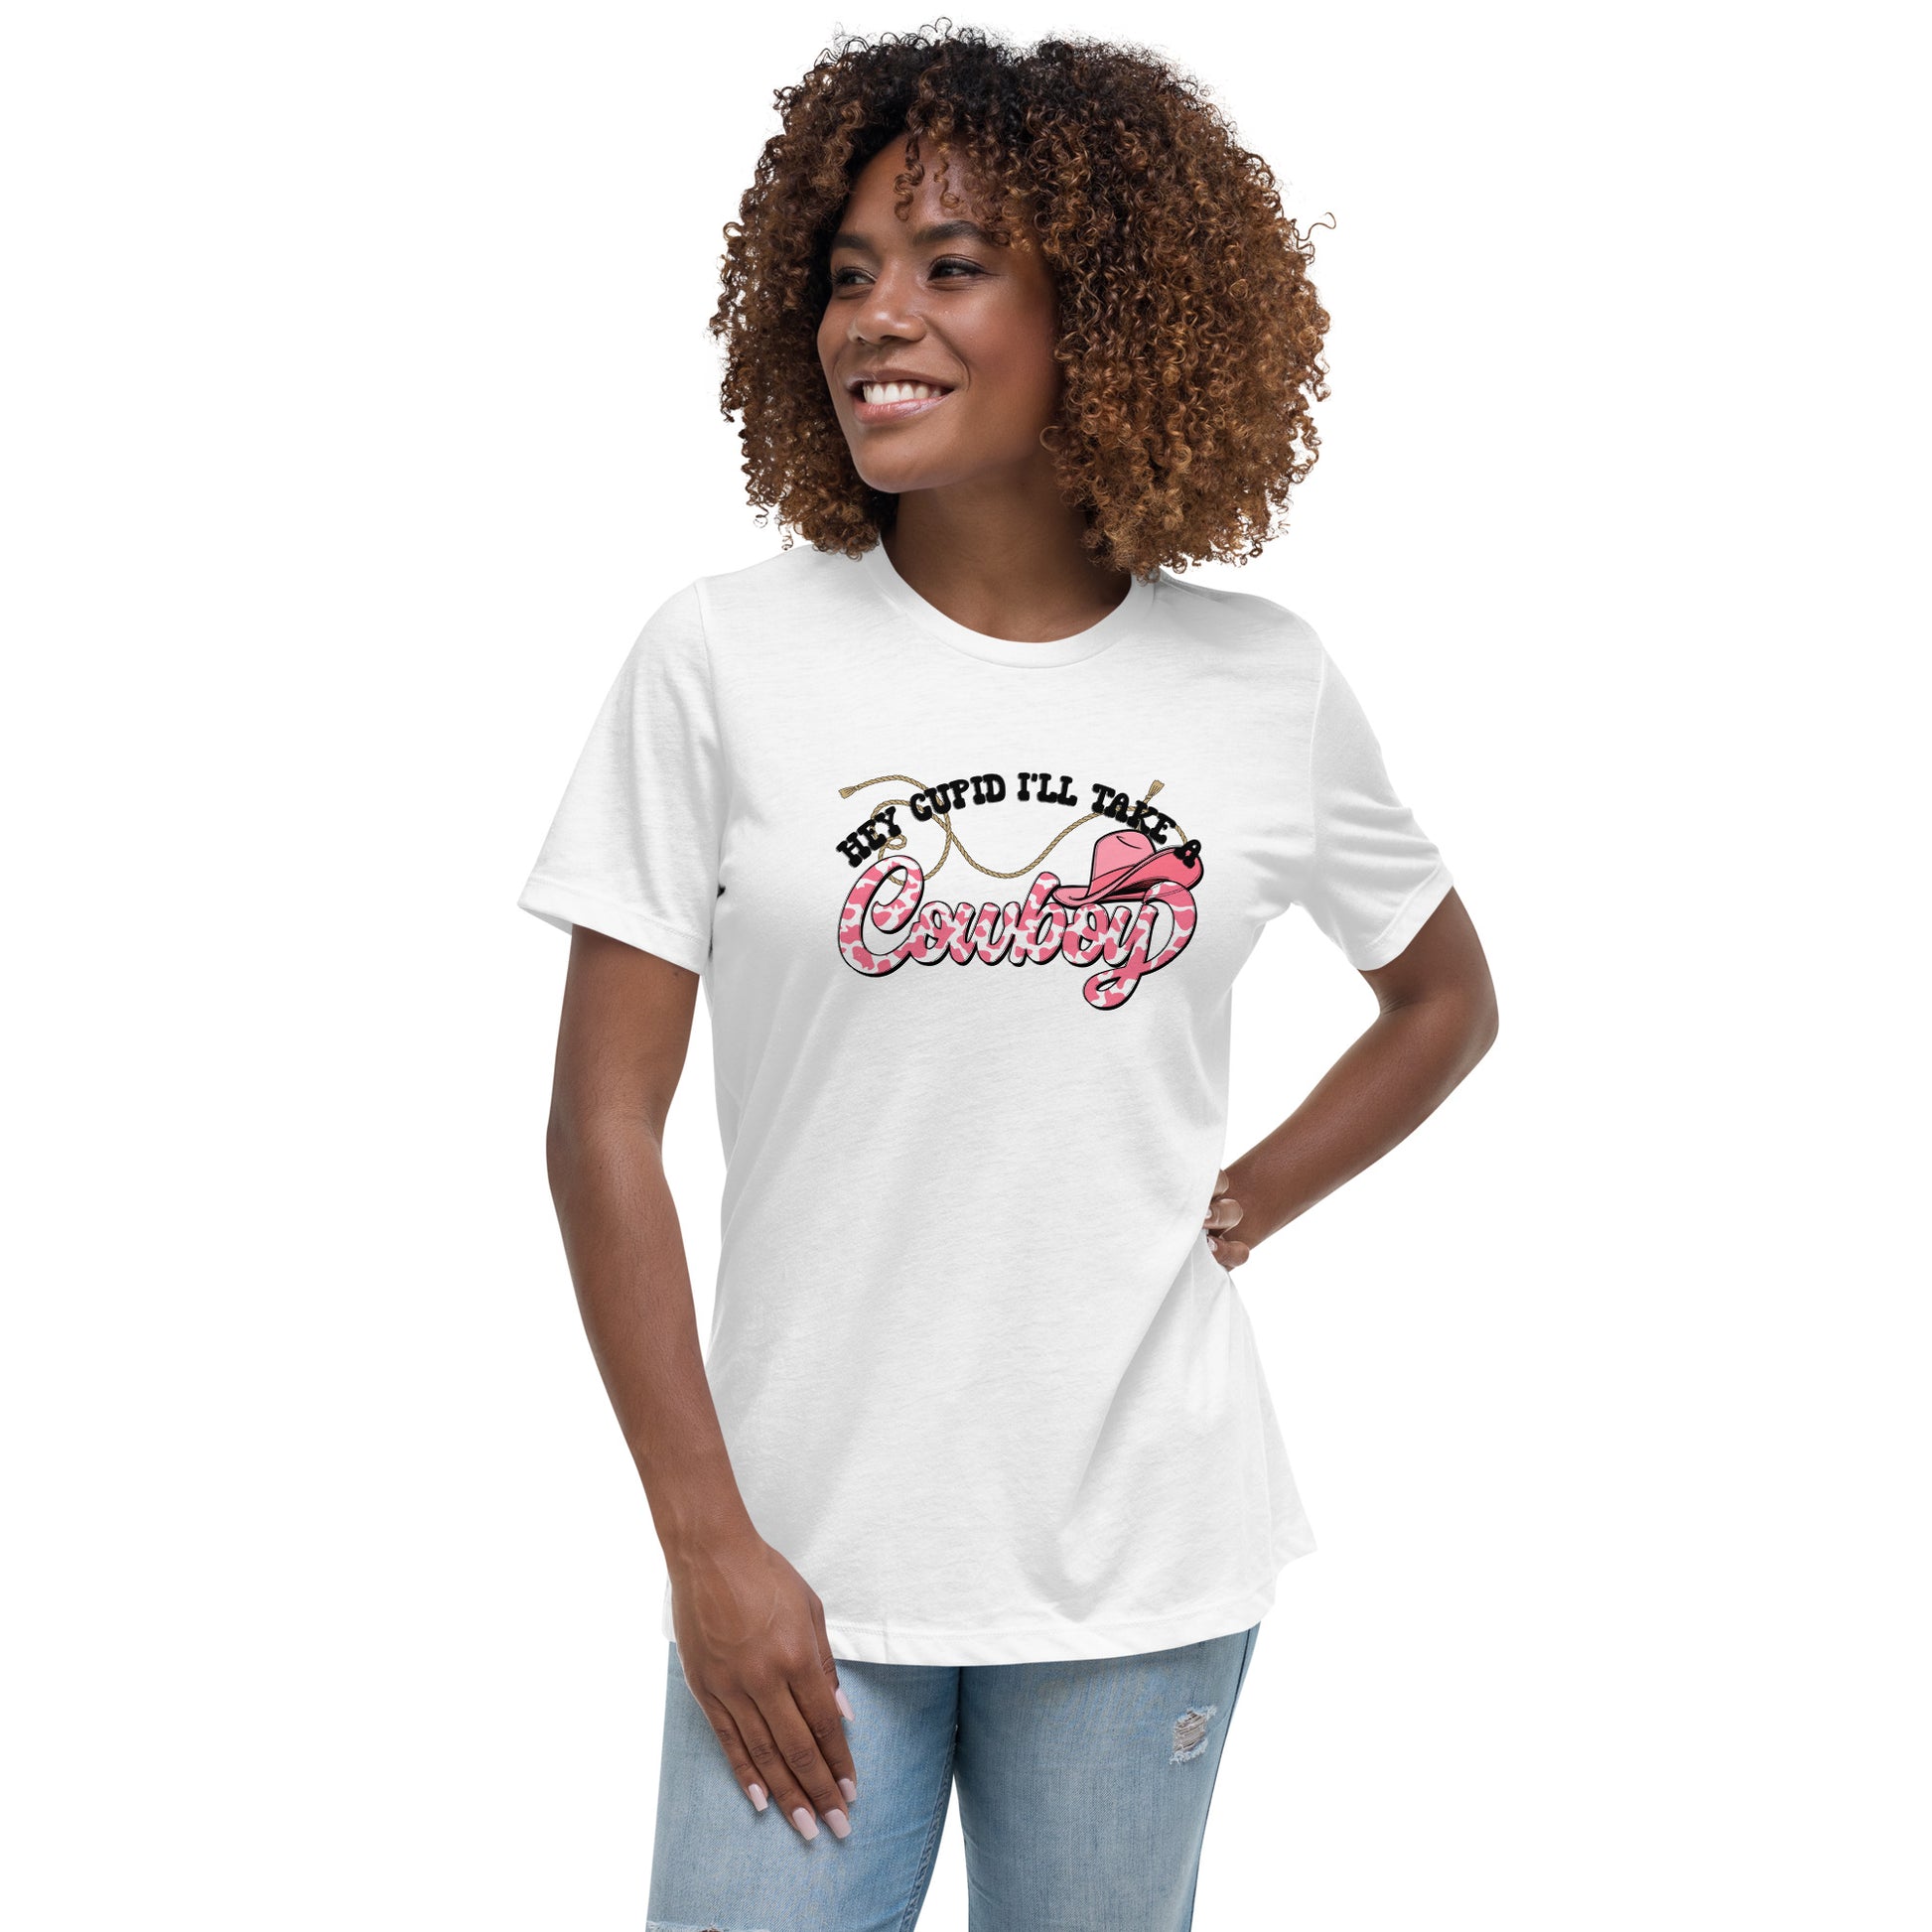 All Take a Cowboy Western Themed Valentine Women's Relaxed T-Shirt CedarHill Country Market